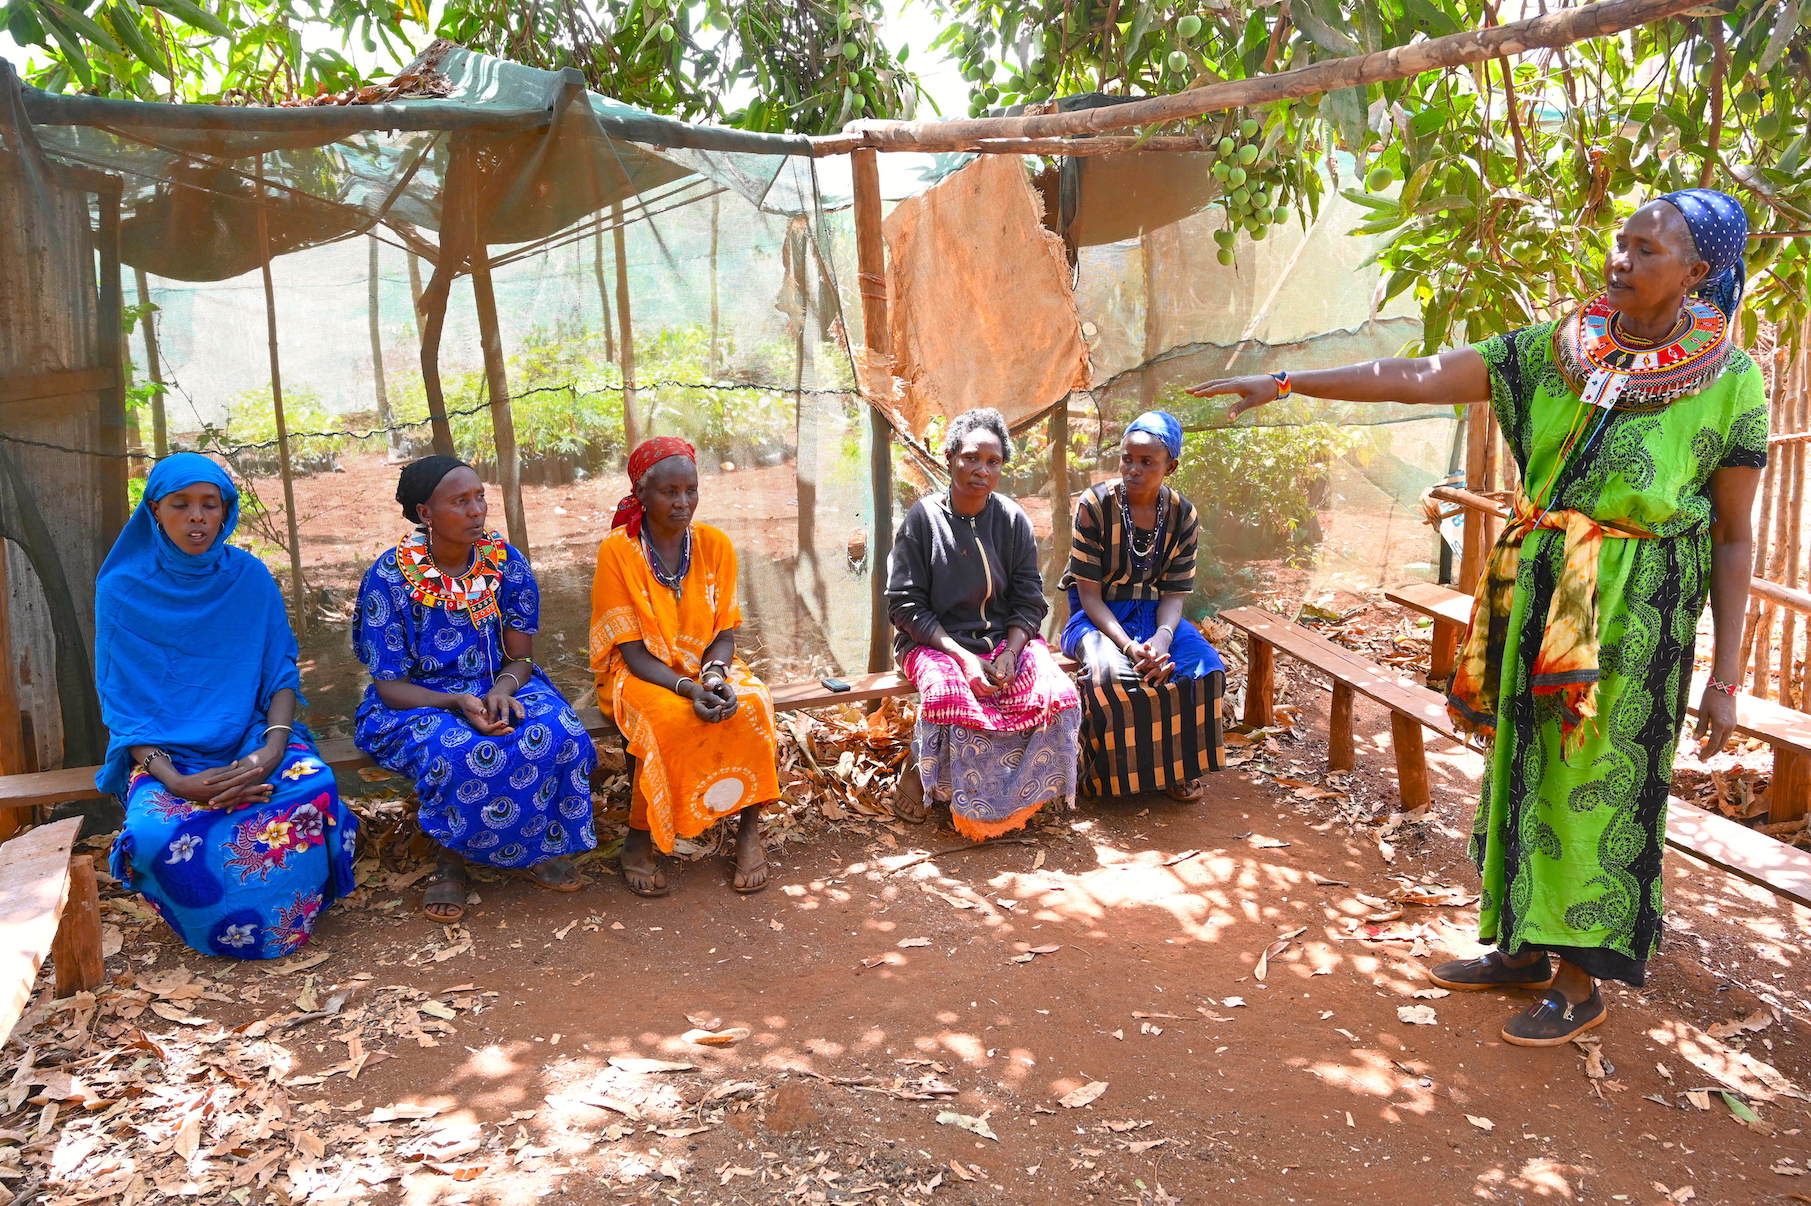 Joyce training women in her community on the importance of afforestation, agroforestry and environmental conservation. 